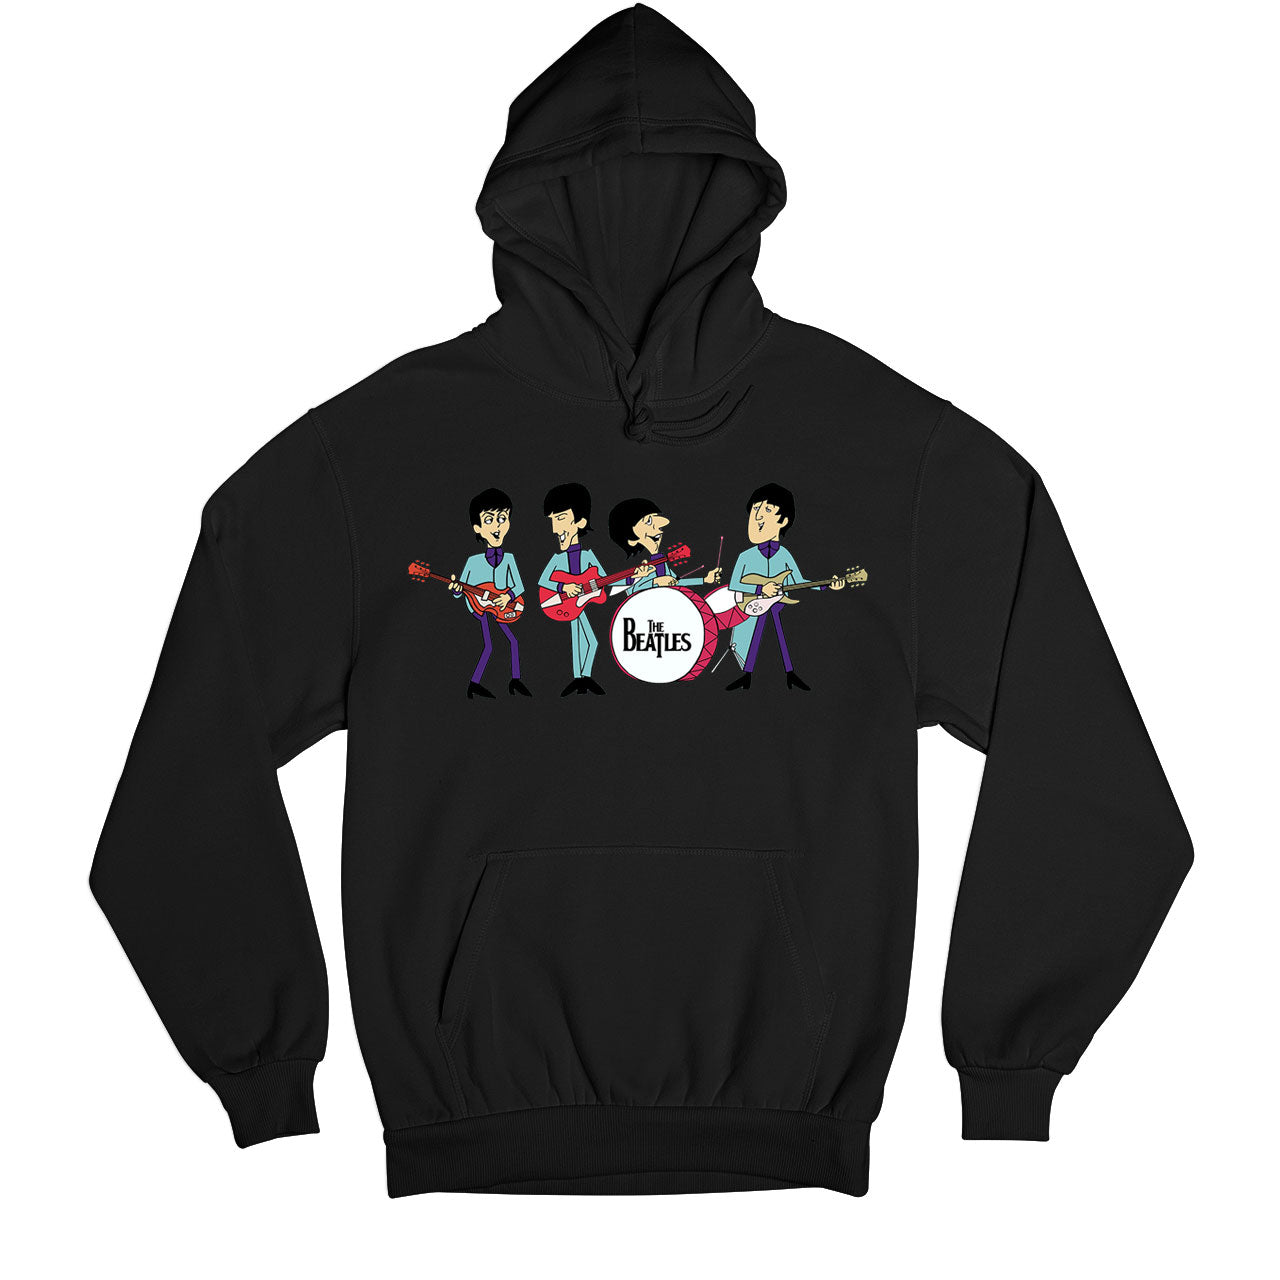 The Beatles Hoodie - On Sale - S (Chest size 40 IN)